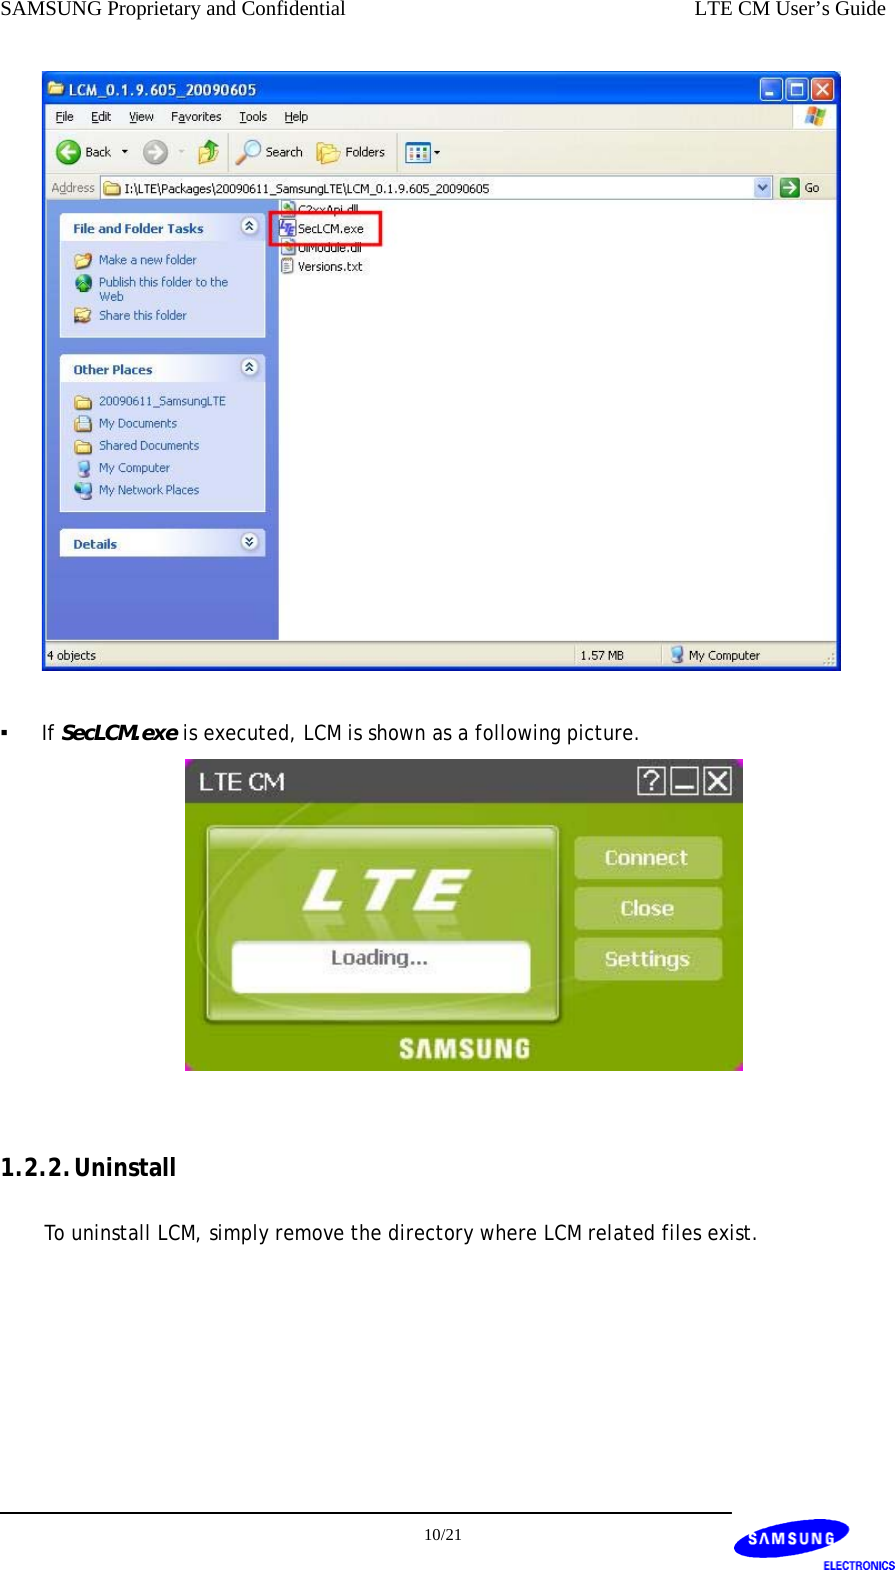 SAMSUNG Proprietary and Confidential    LTE CM User’s Guide  10/21    ▪  SecLCM.exe is executed, LCM is shown as a following picture. If   1.2.2. Uninstall To uninstall LCM, simply remove the directory where LCM related files exist. 